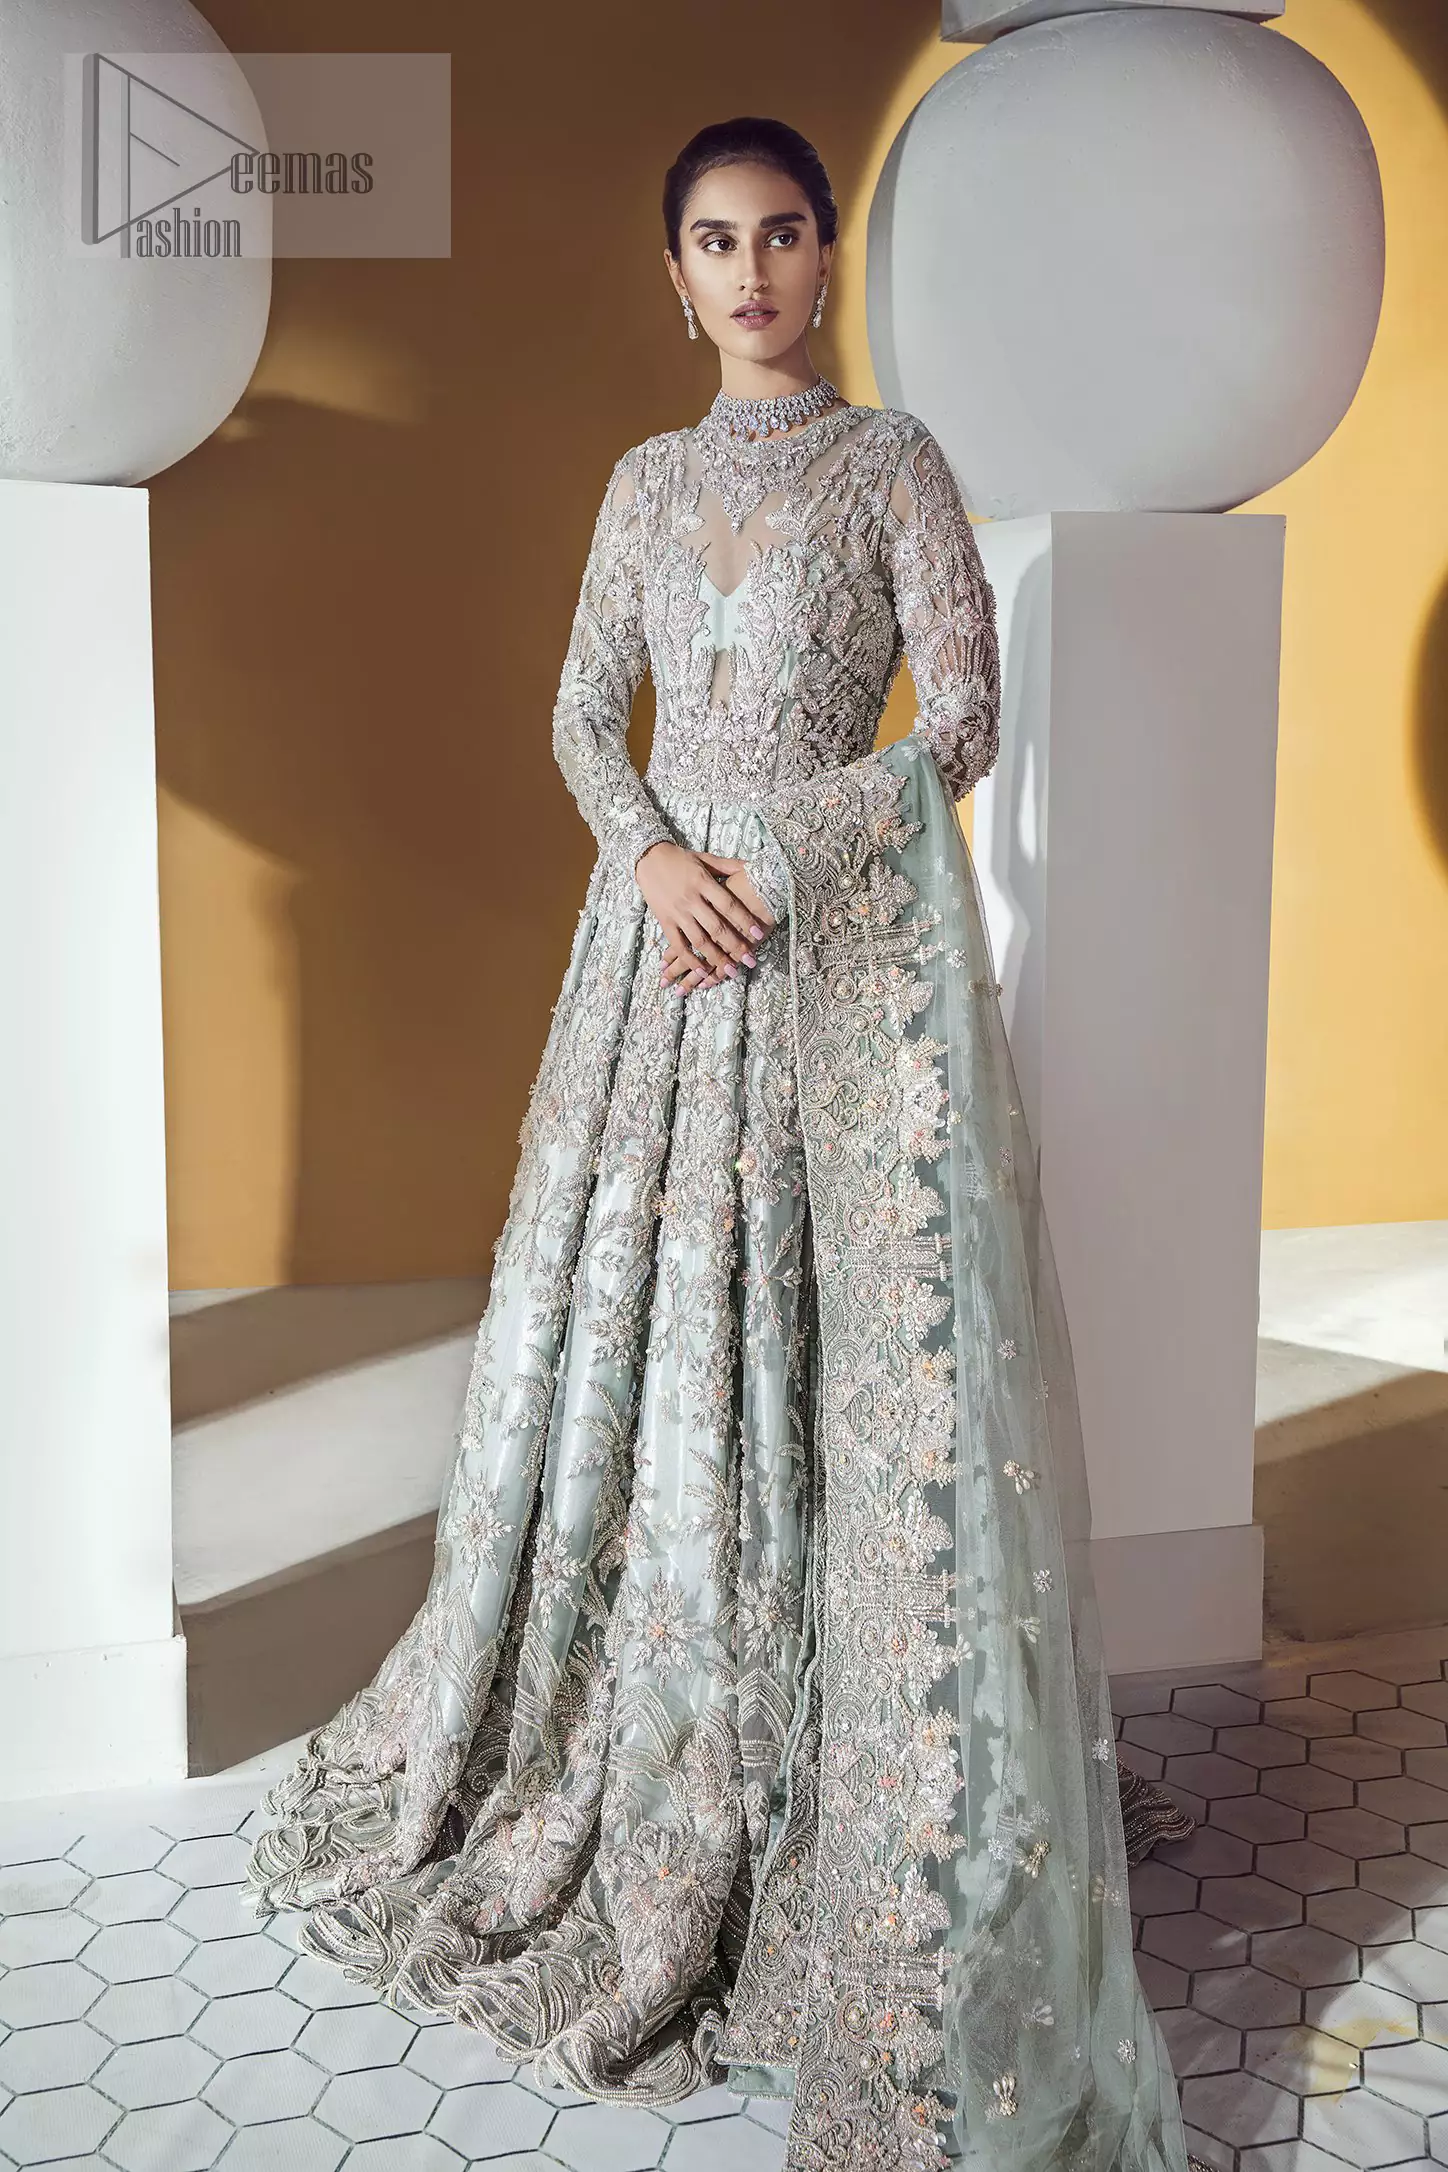 Furthermore this shirt is made of rich floral embroidery which is enhanced with zardoze work. It is highlighted with kora, dabka, tilla, sequins and pearls. It comes with brocade churidar pajama. It is coordinated with tissue dupatta which is sprinkled with sequins all over it.